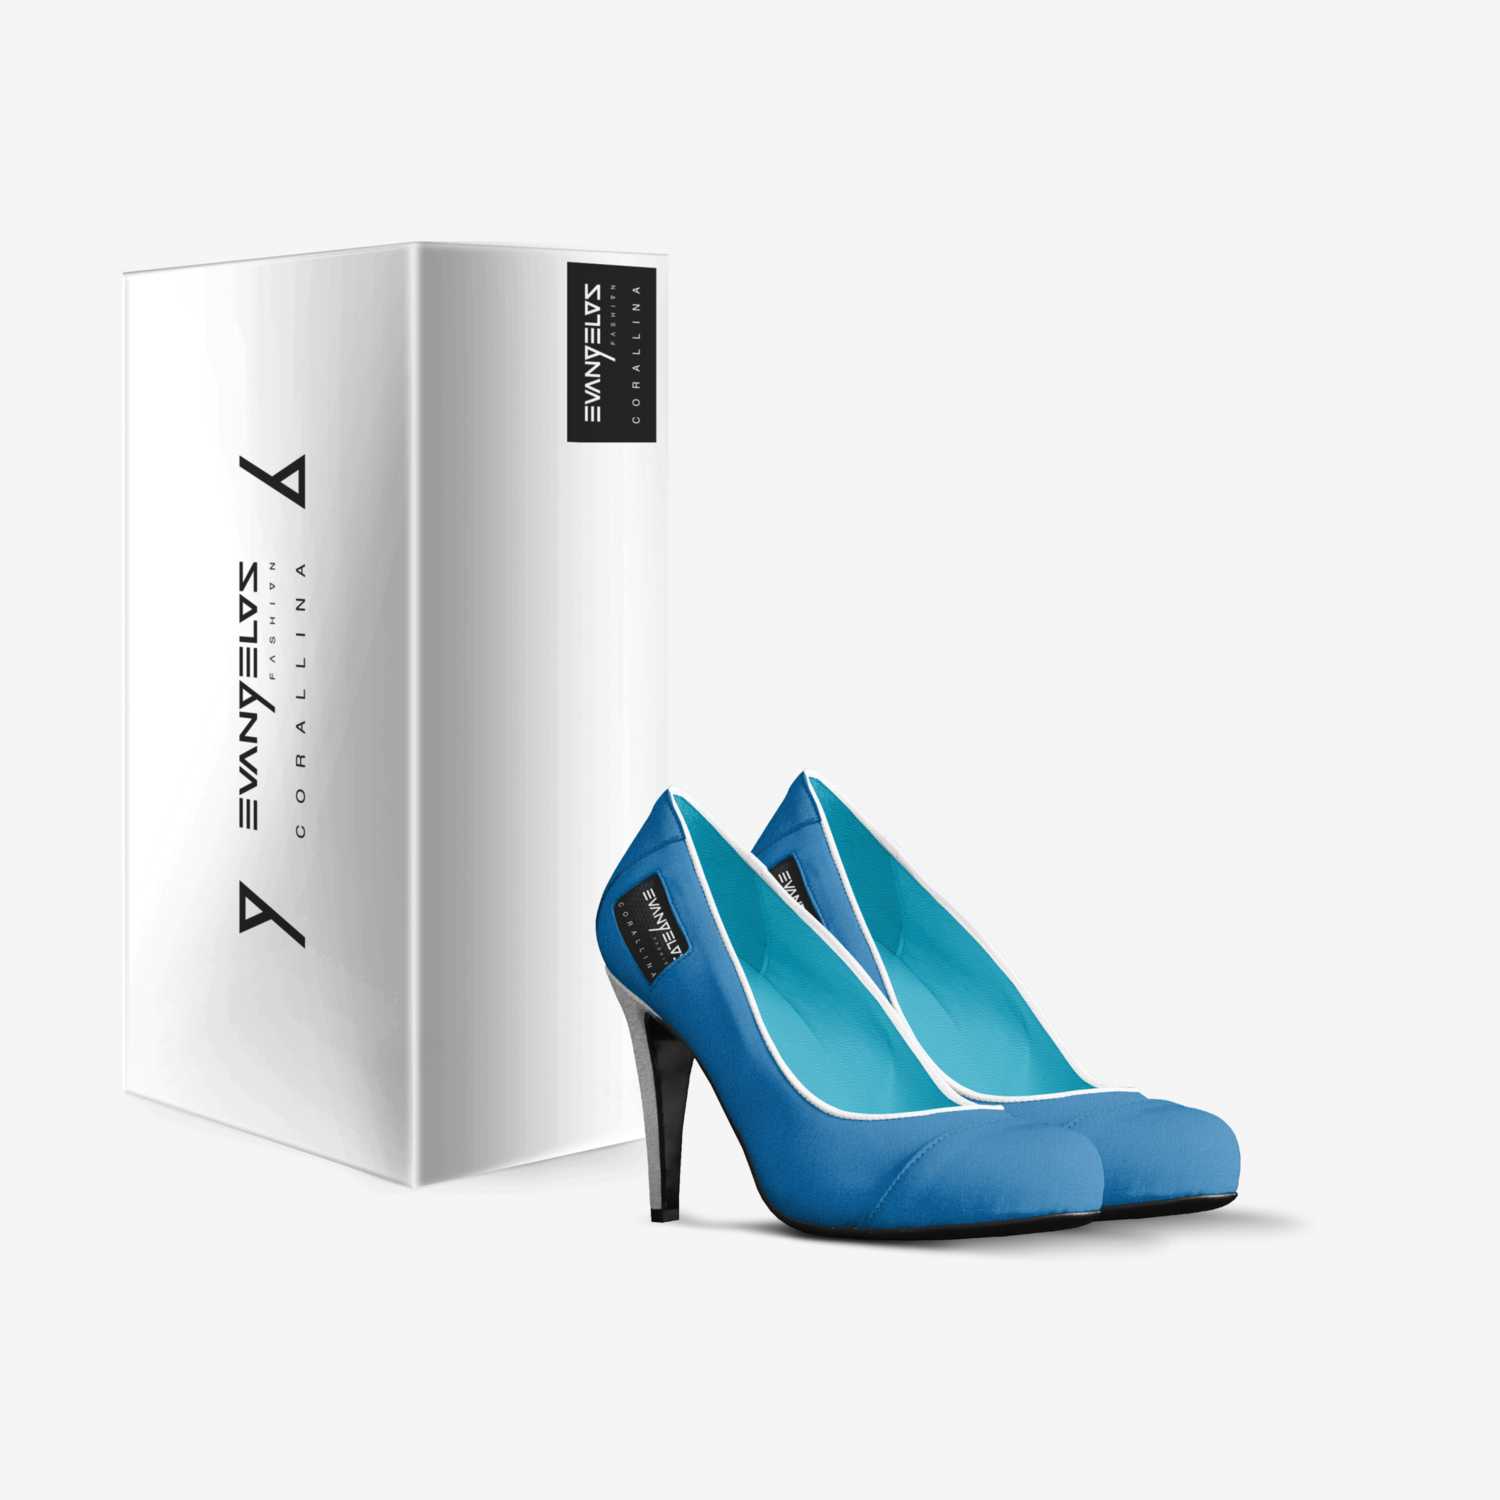 CORALLINA custom made in Italy shoes by Evangelos Fashion | Box view